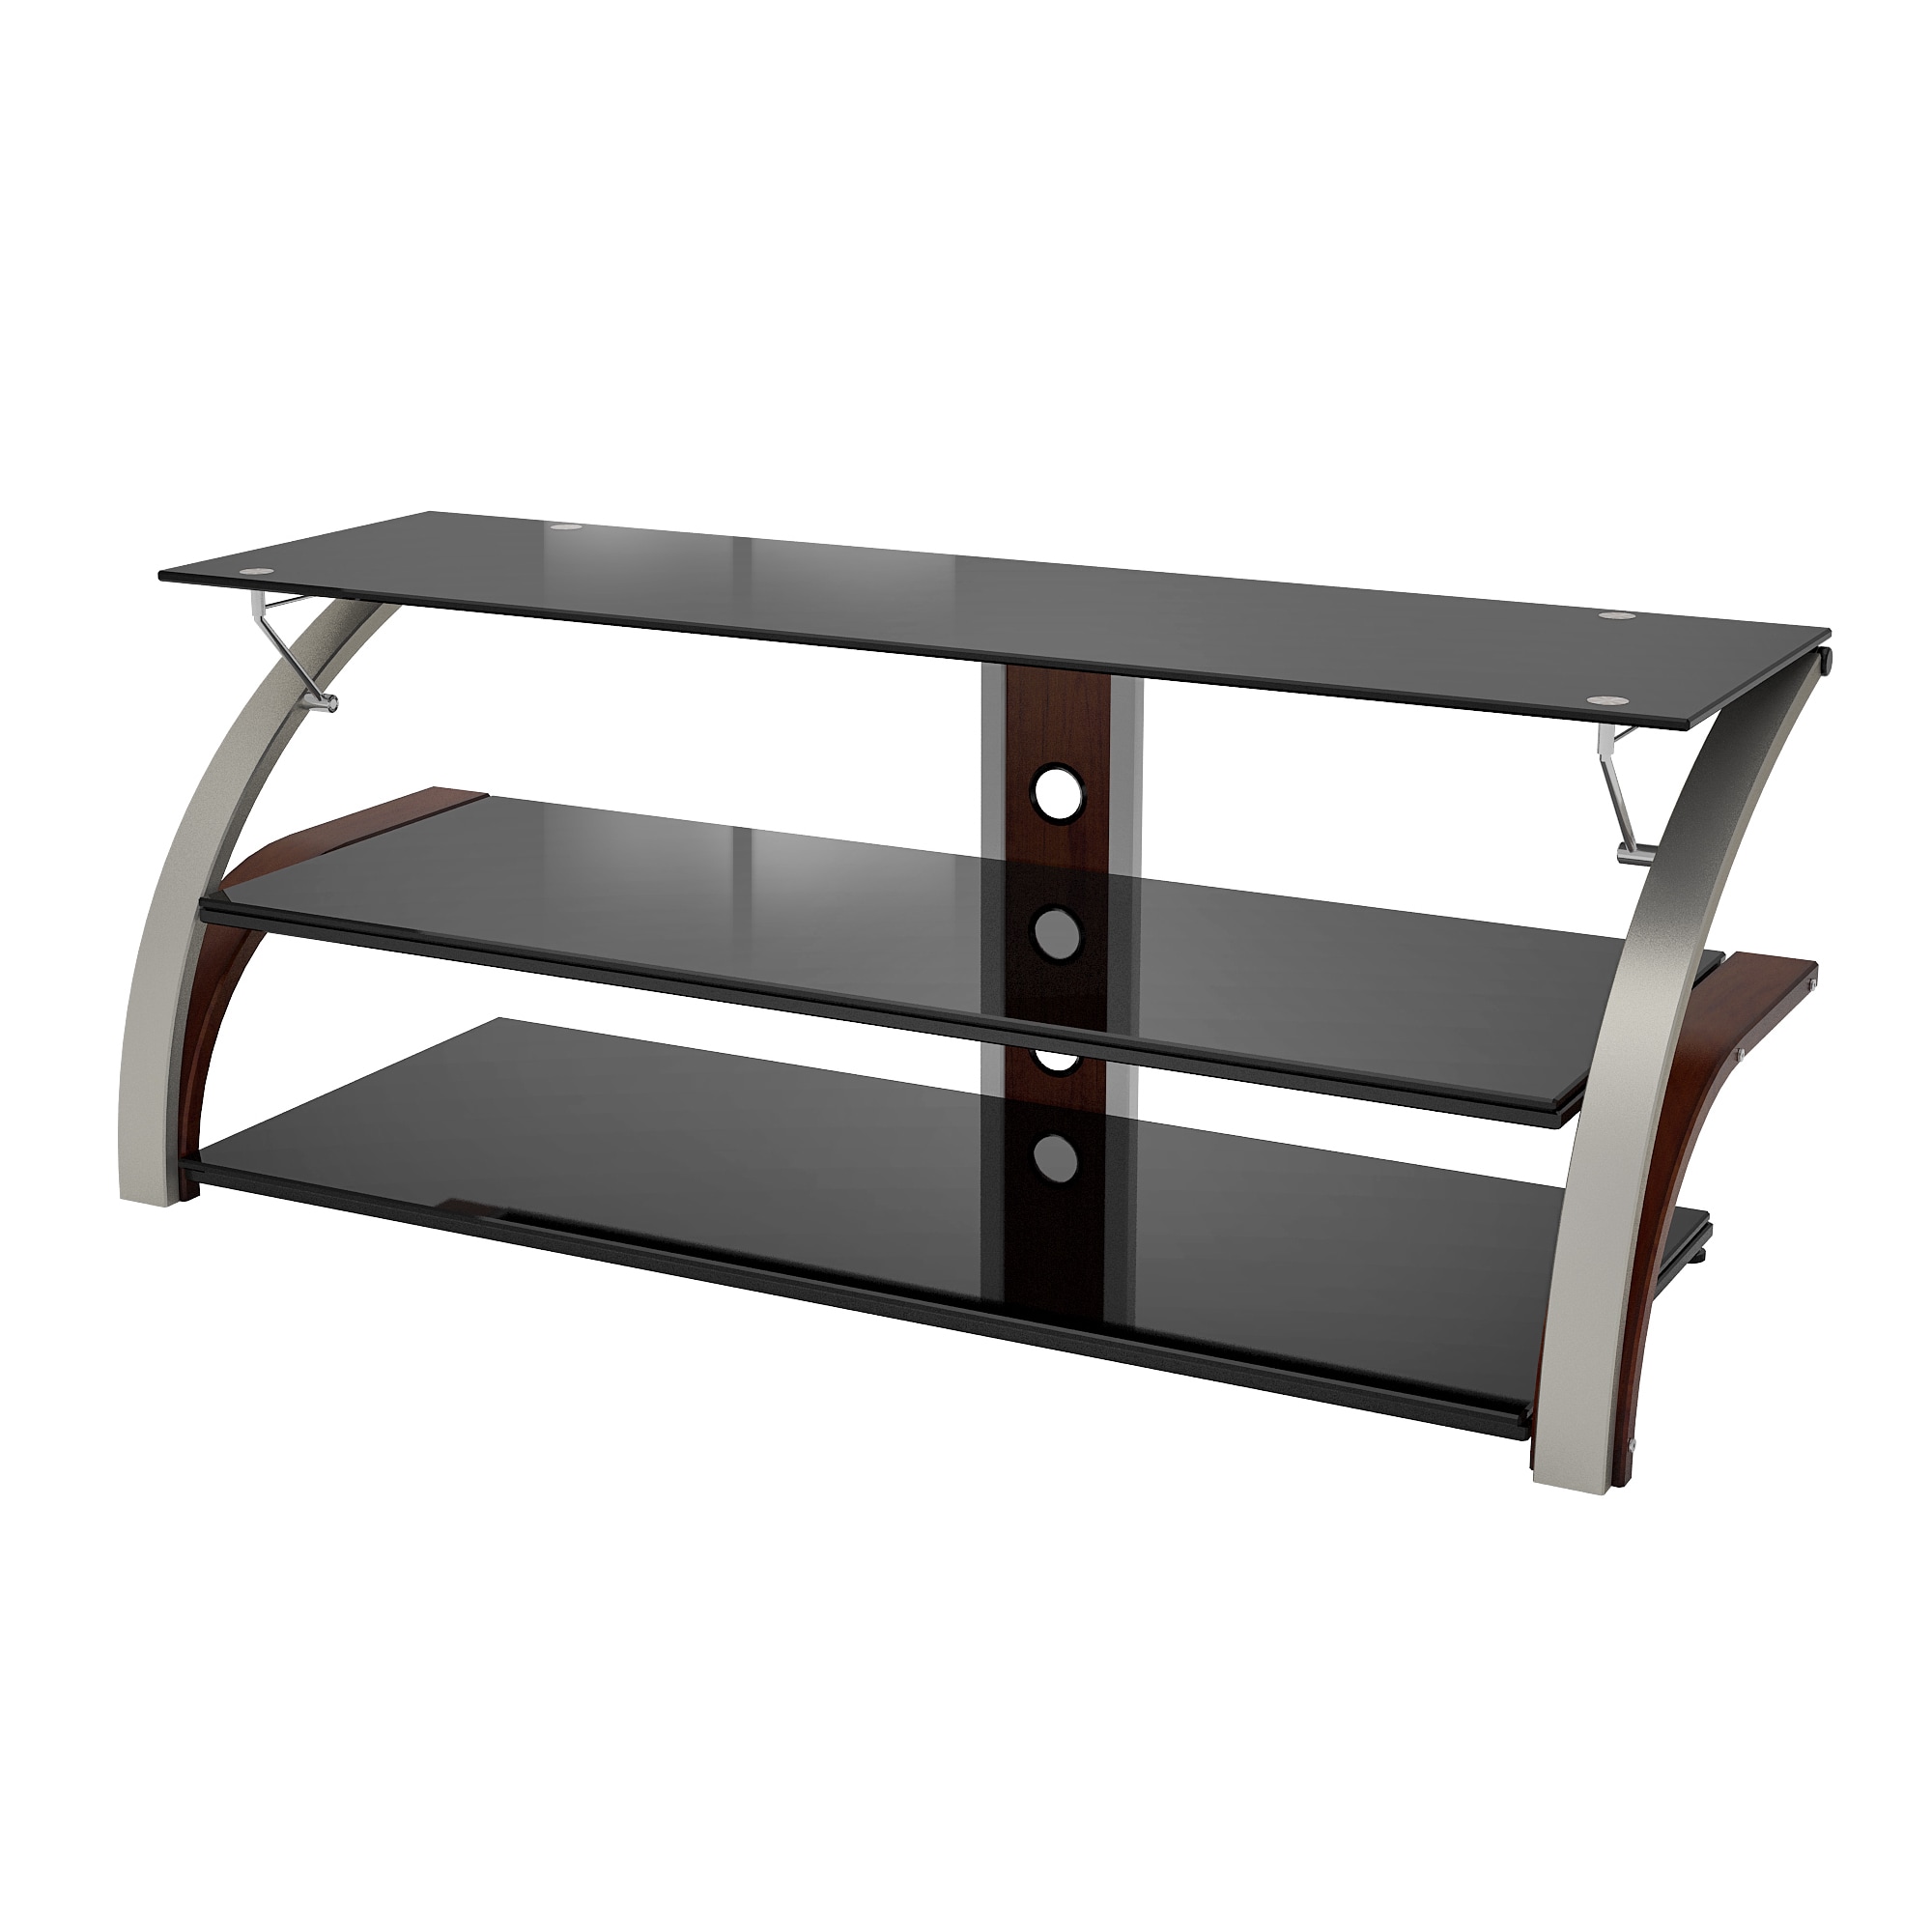 Elecktra Champagne 55 inch TV Stand   55   Overstock   9923422